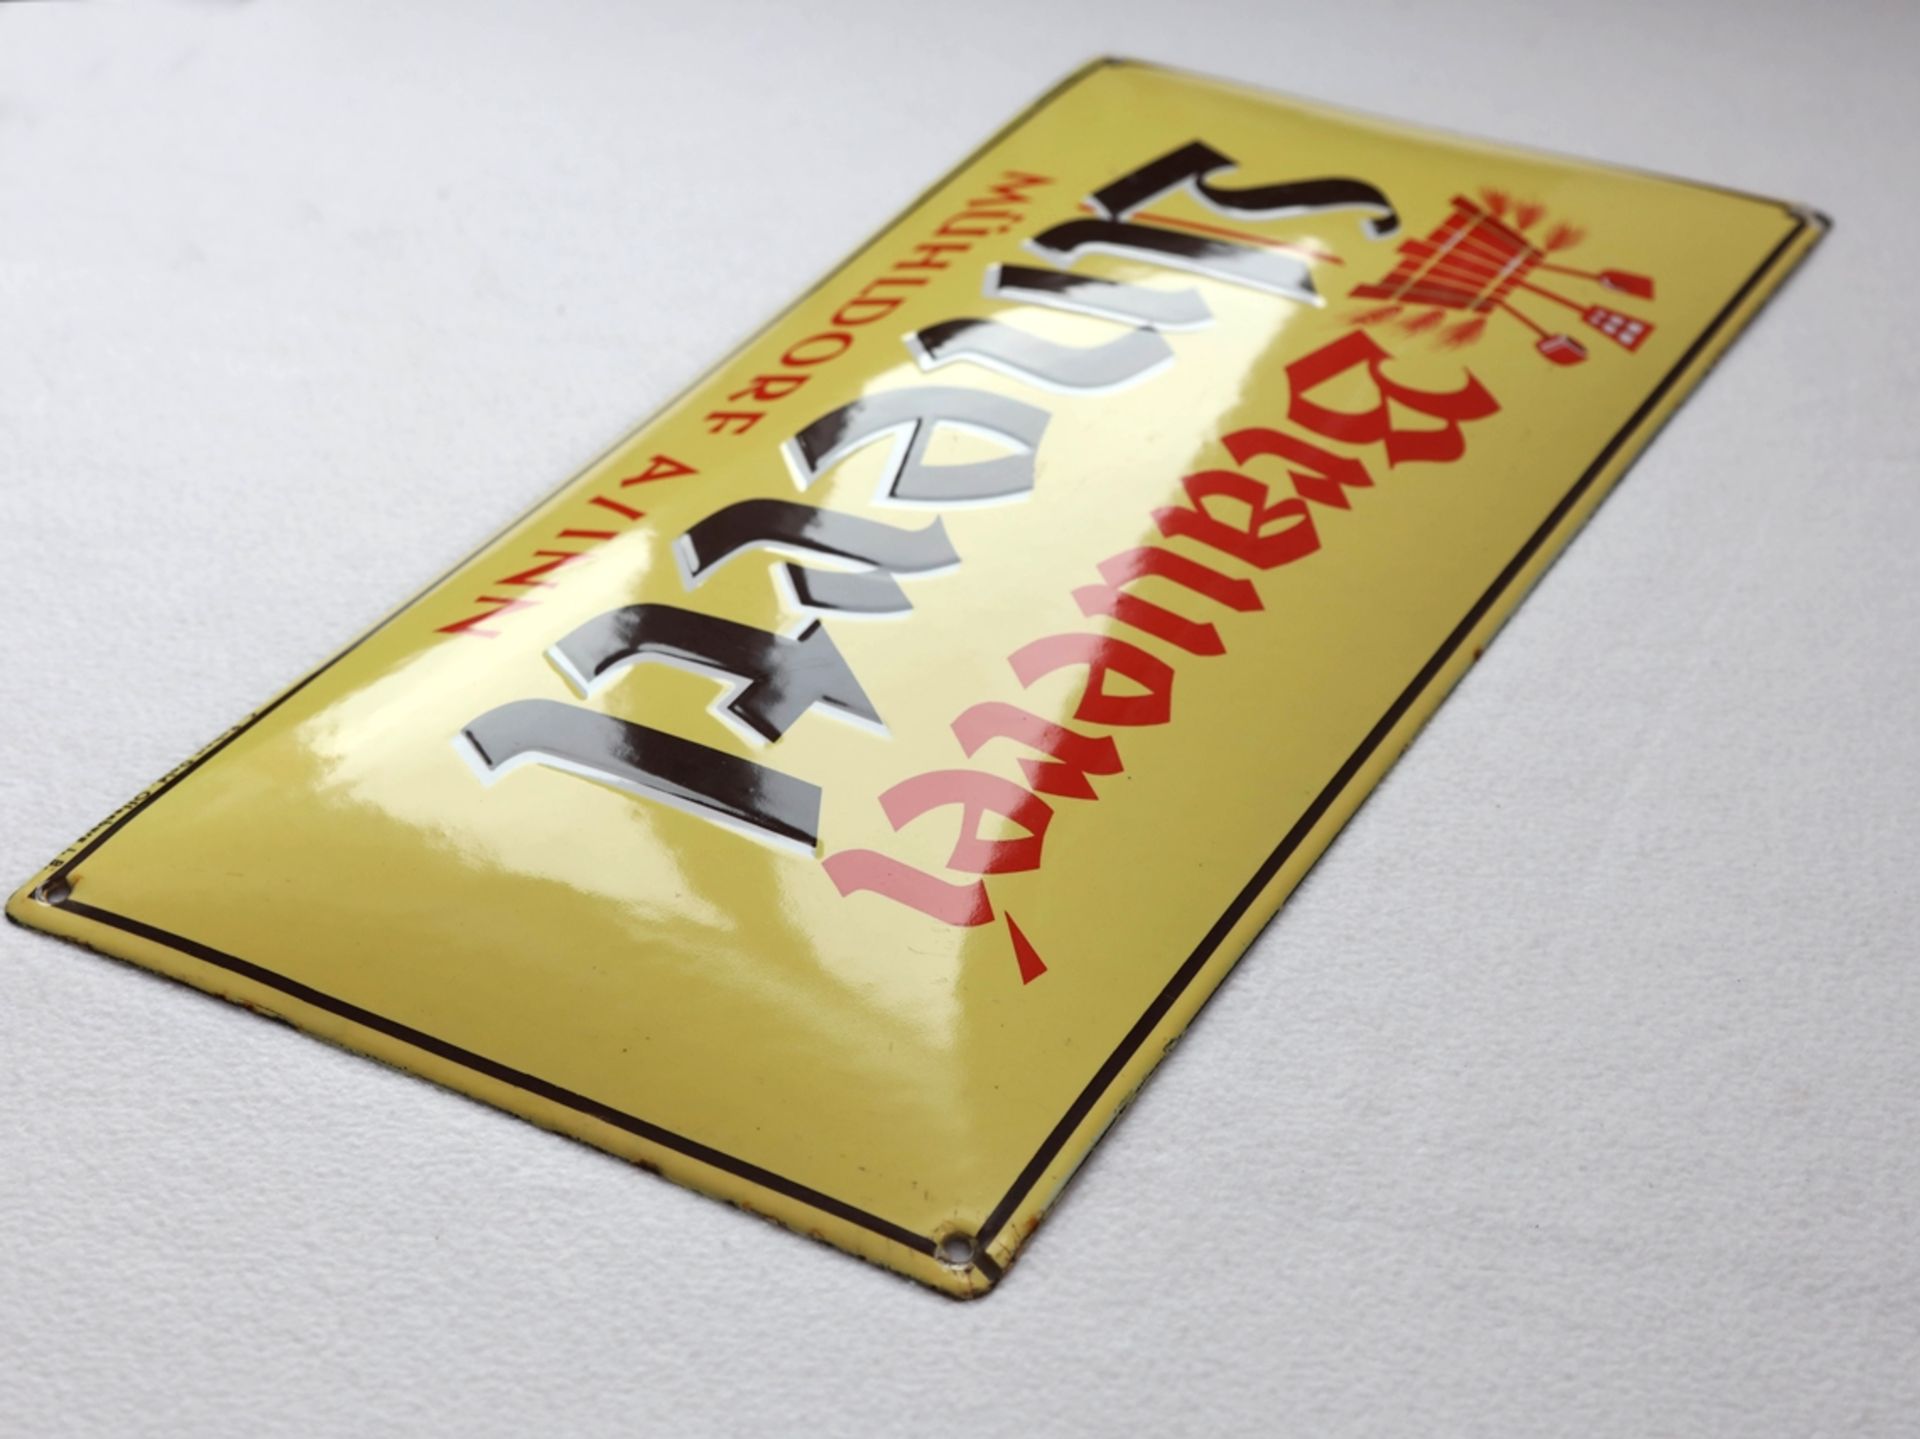 Enamel sign for the Unertl brewery, wheat beer, Mühldorf am Inn, around 1930 - Image 5 of 7